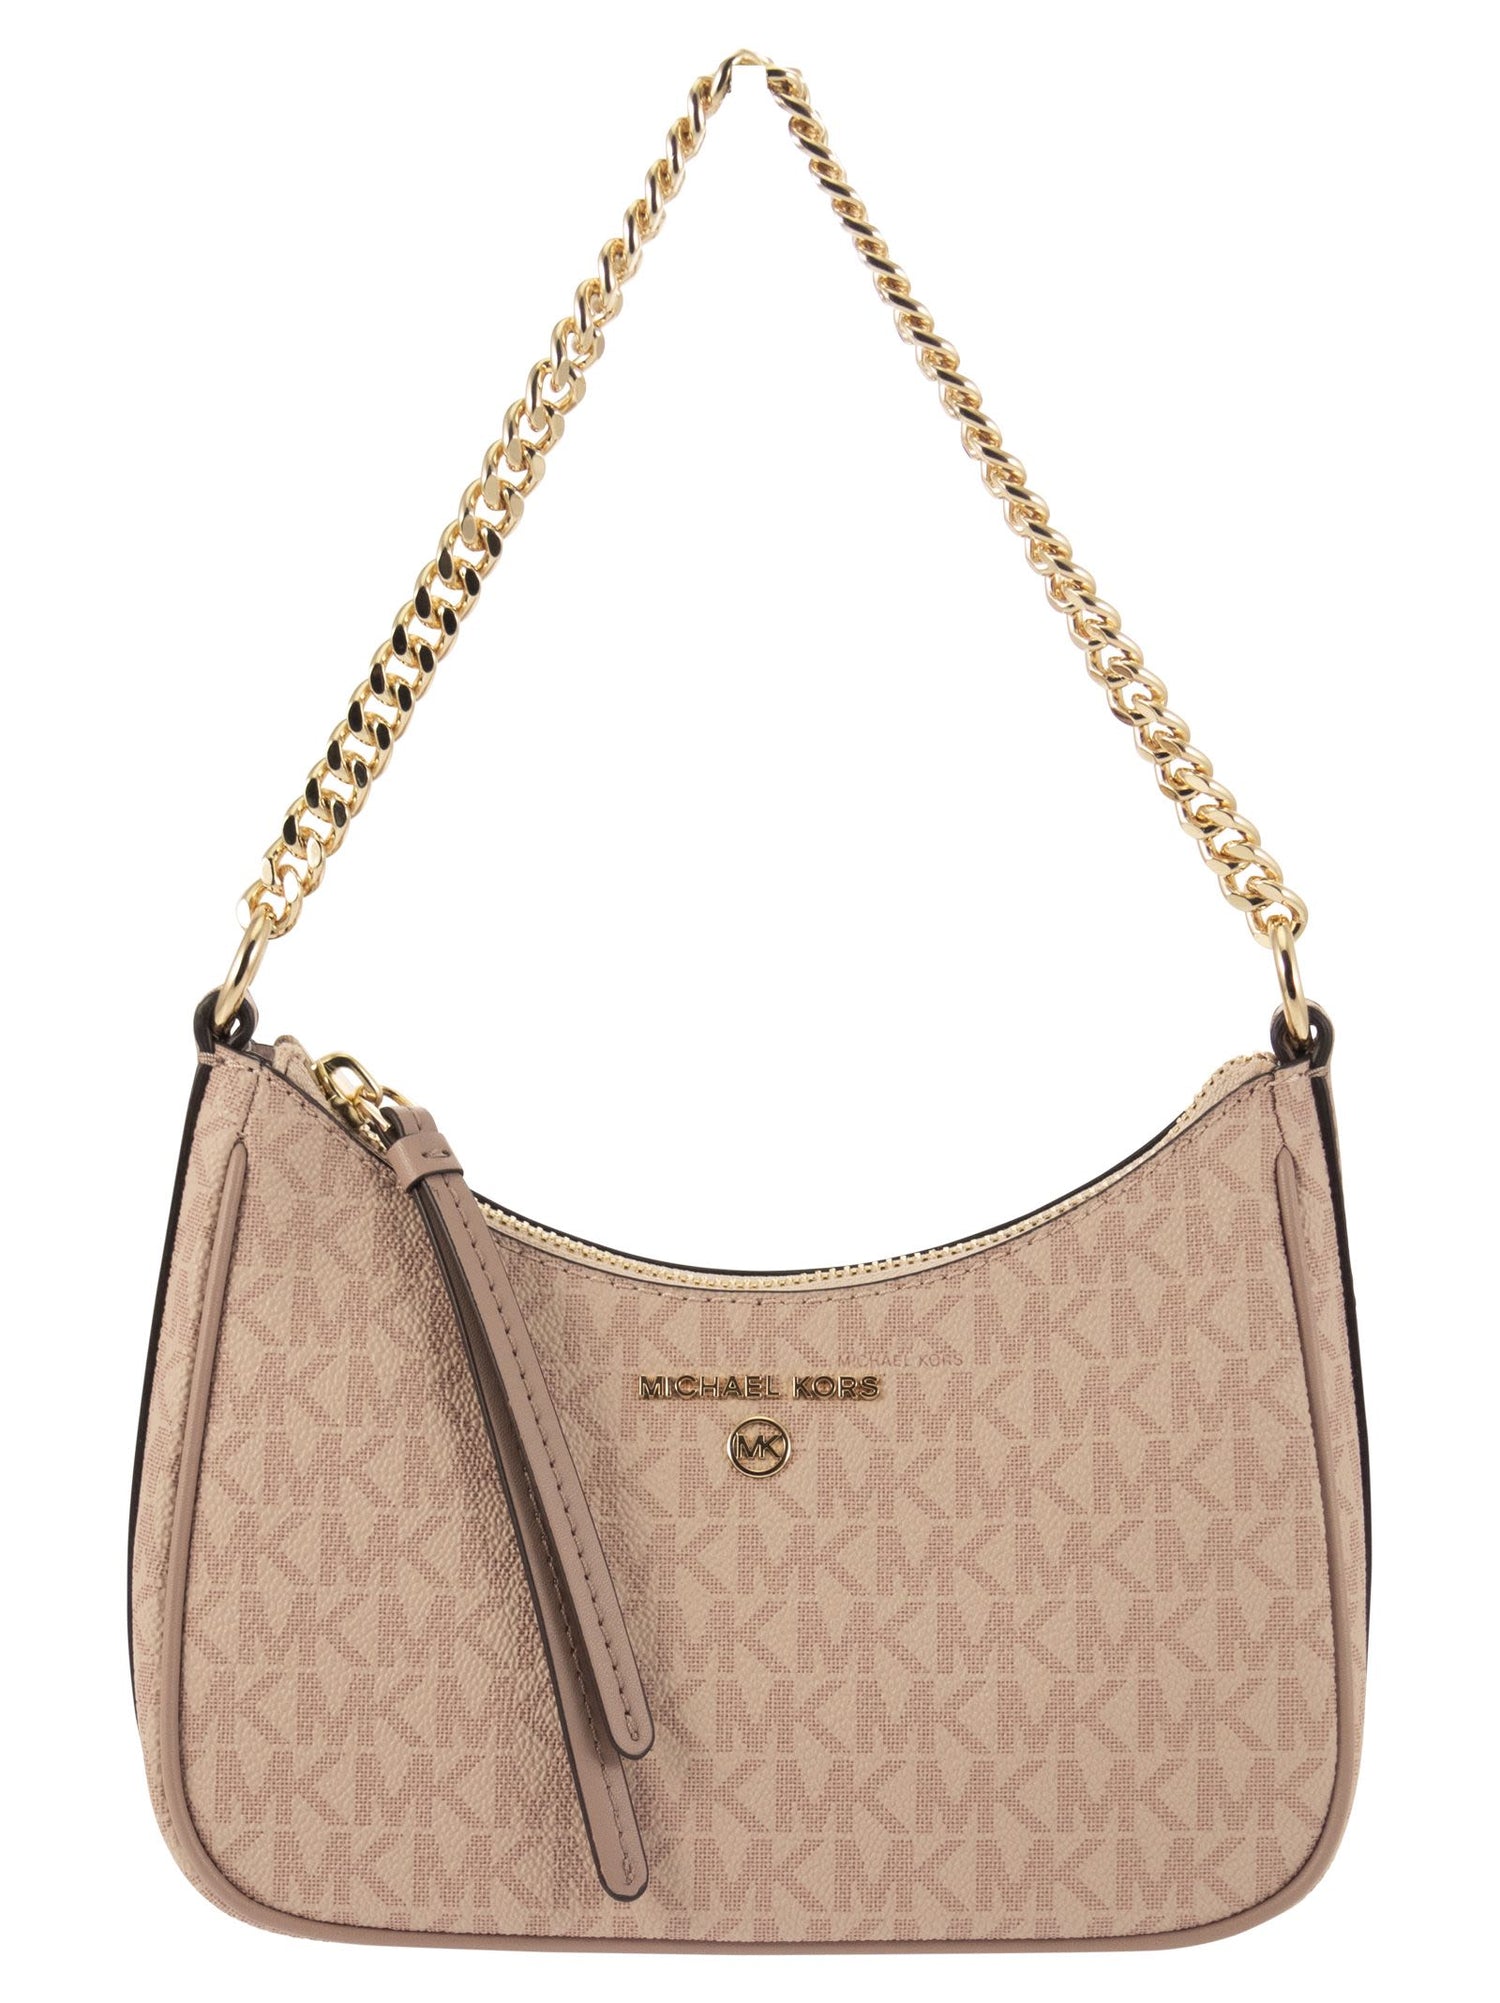 Michael Kors Pale Gold Ginny Leather Crossbody Bag | Best Price and Reviews  | Zulily